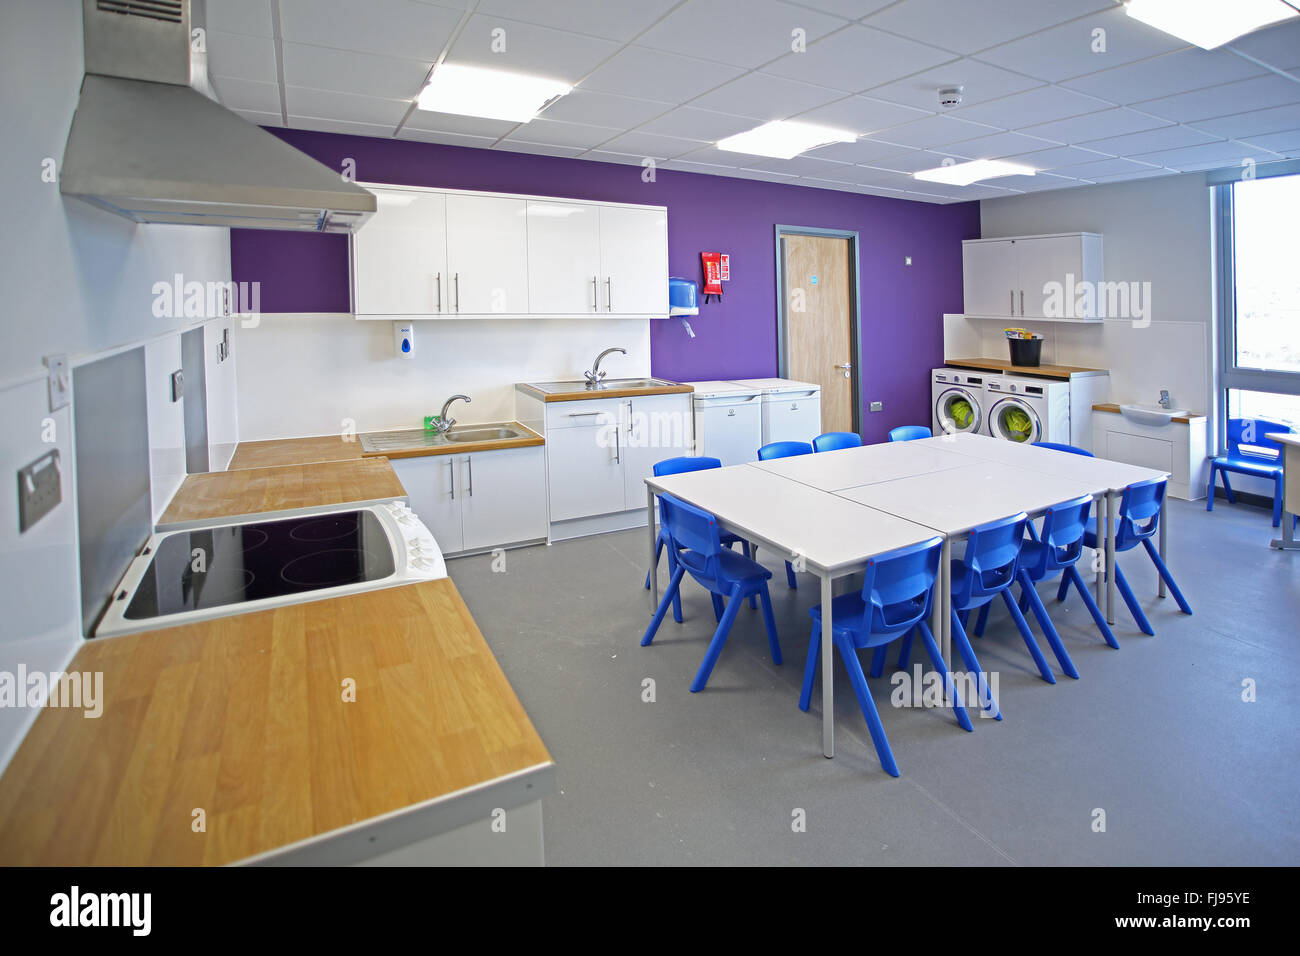 A home economics classroom in a new British Primary School. Shows table, cookers and washing machines Stock Photo